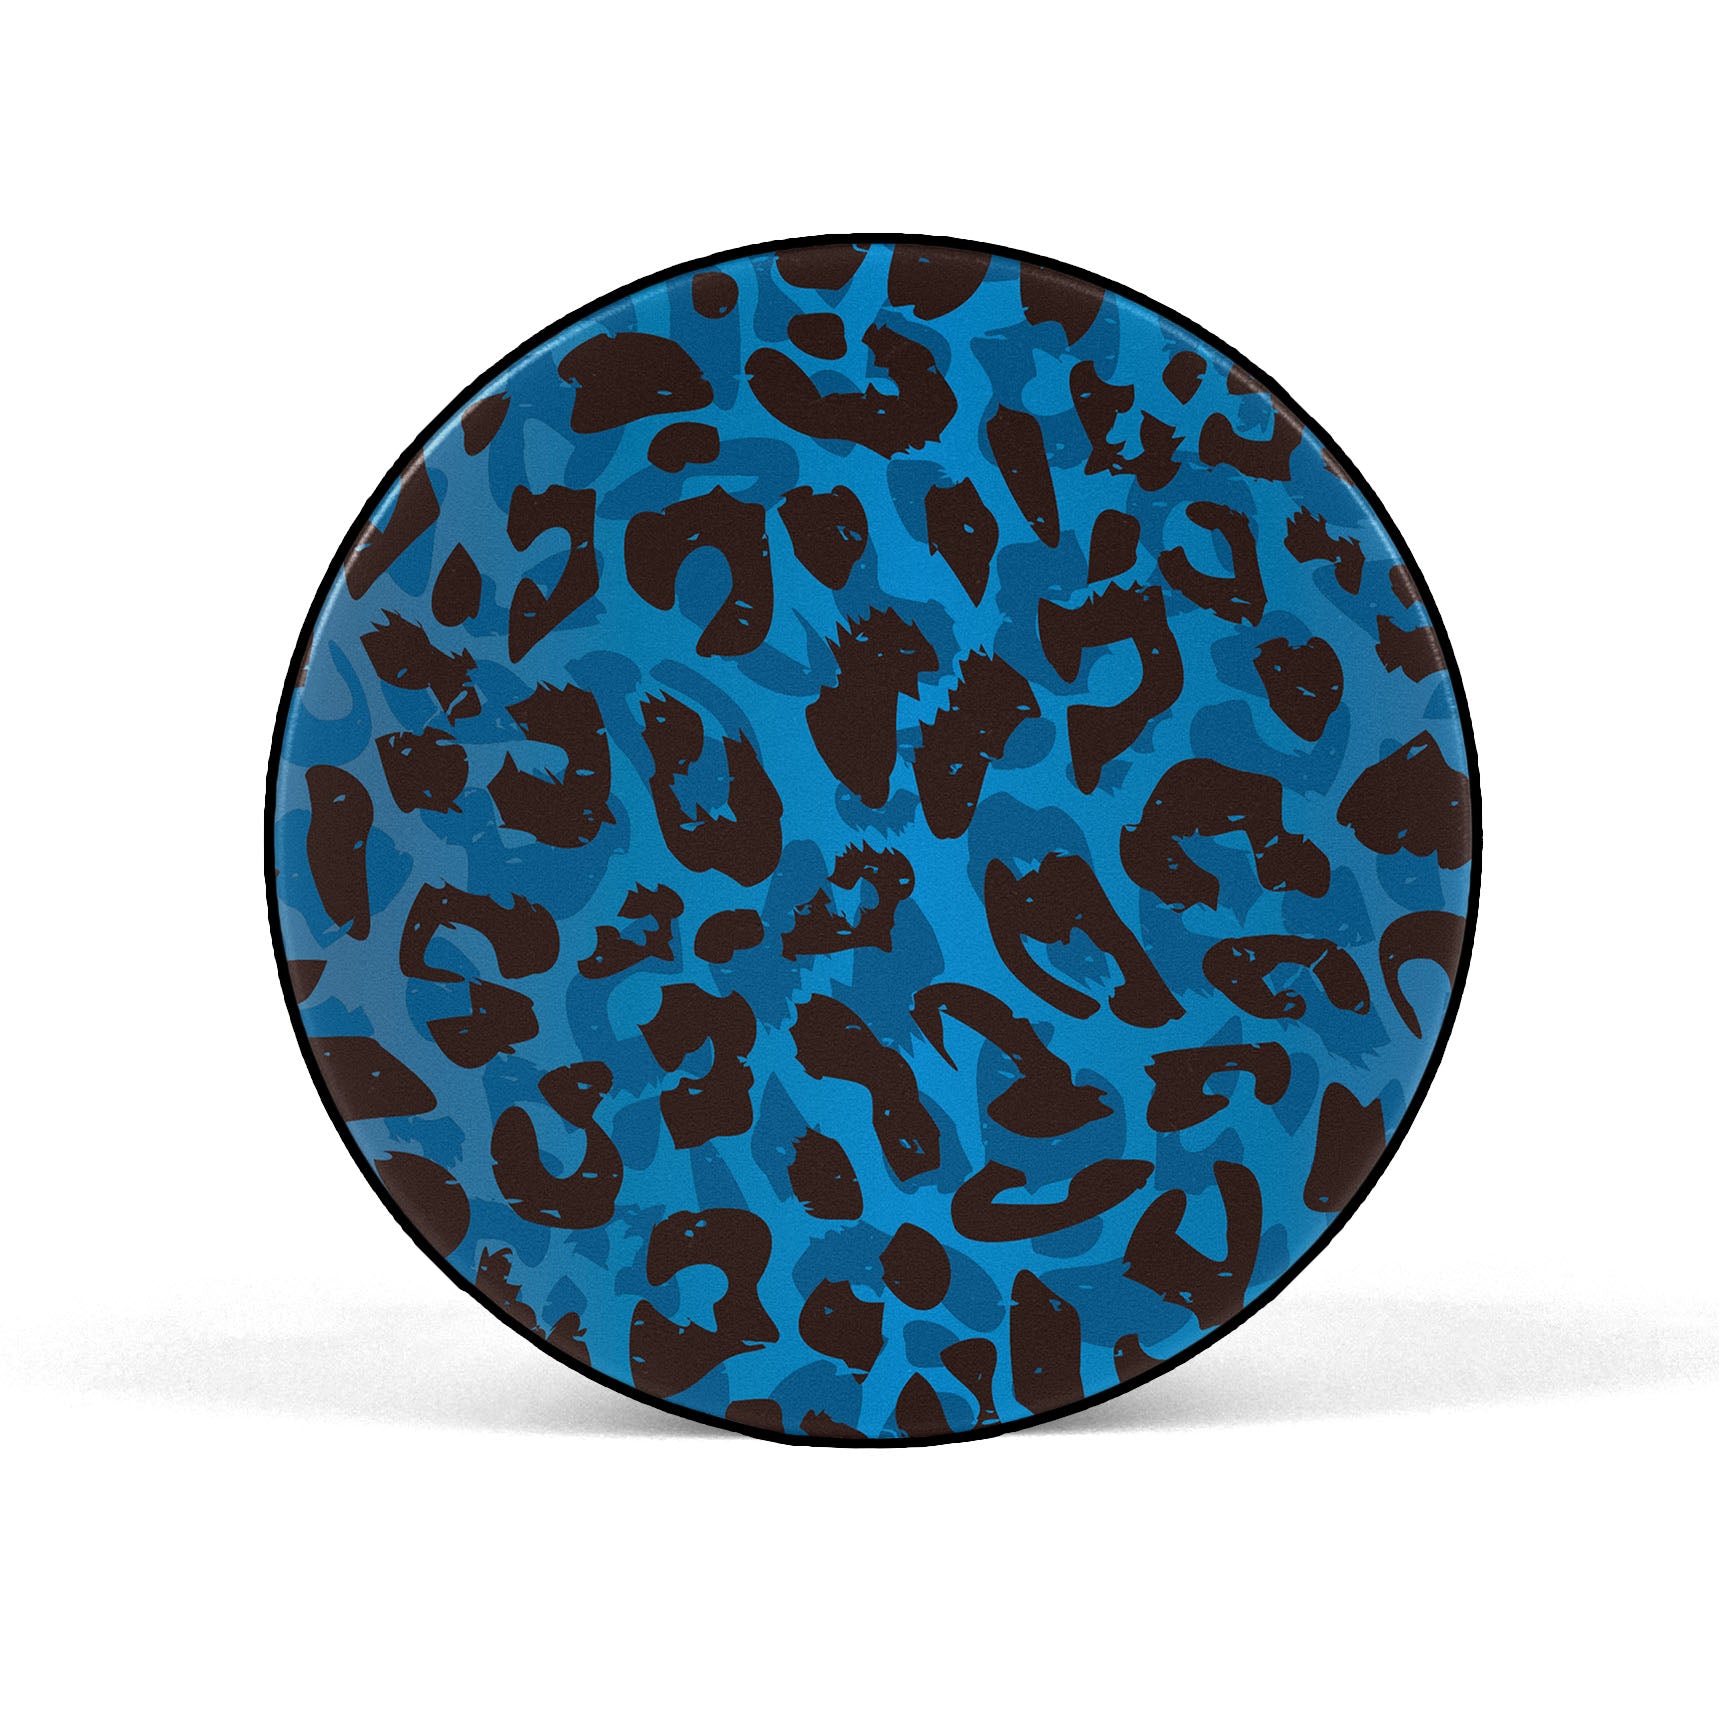 Blue Leopard Print Rubber Phone Case for iPhone, Samsung, Huawei & Pixel